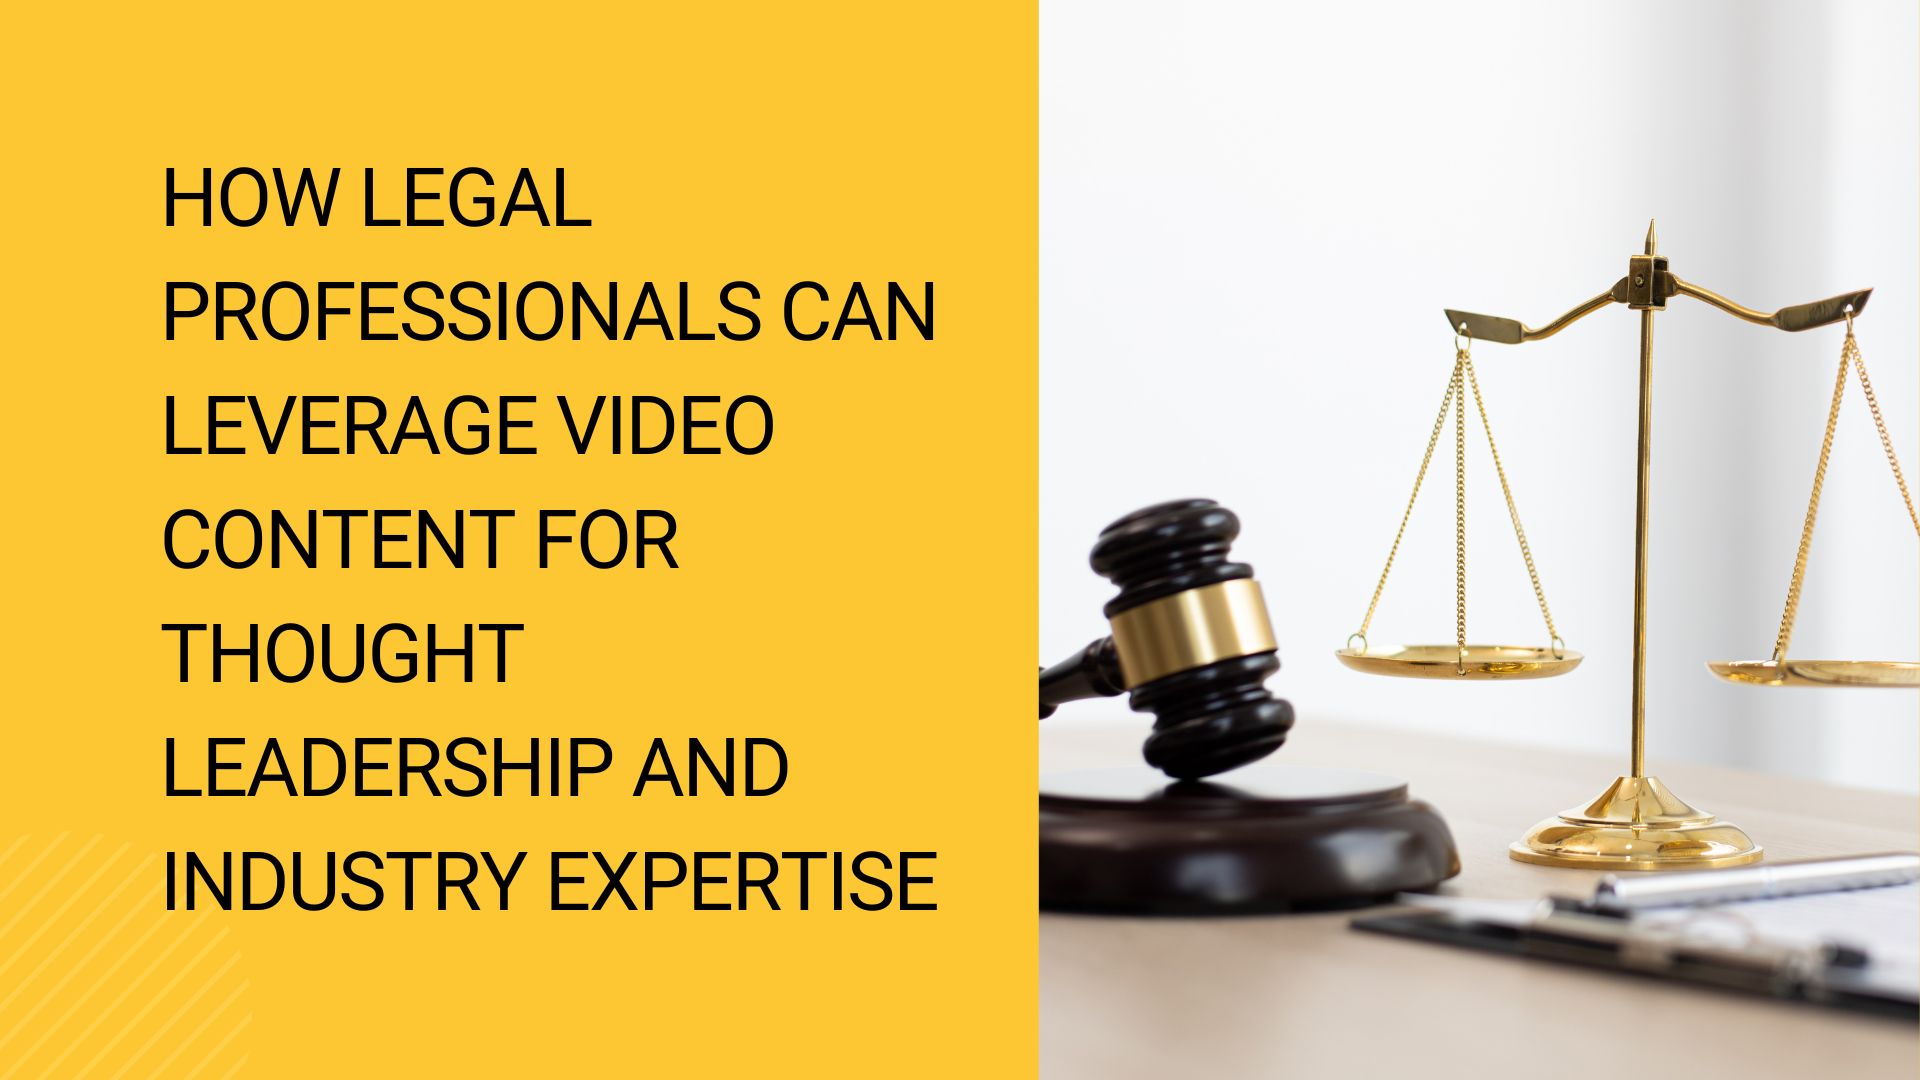 Video Content for Legal Professionals